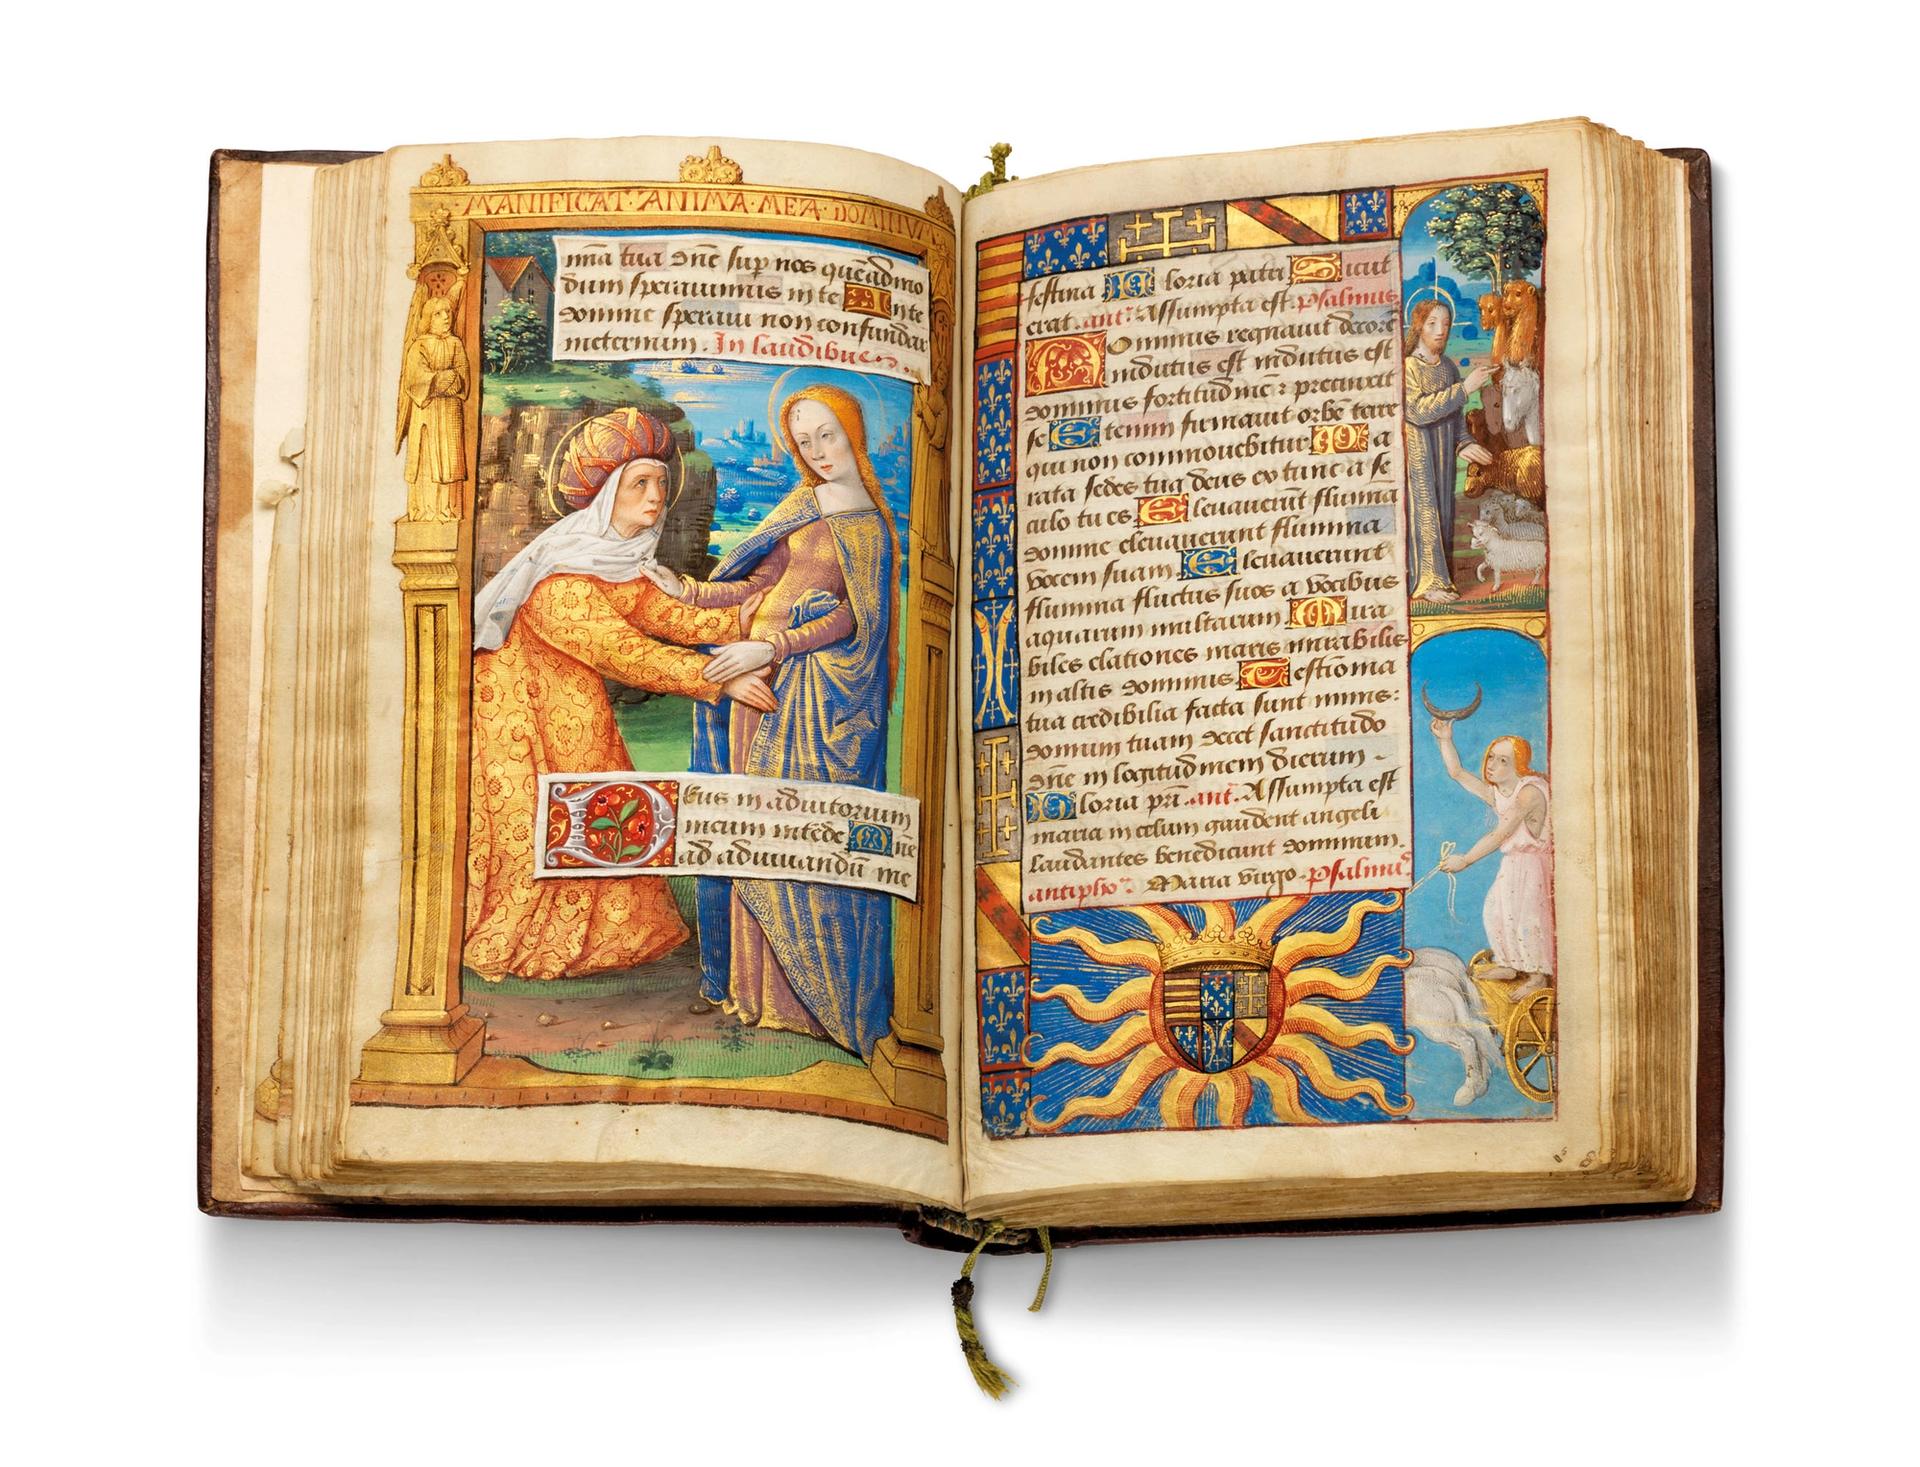 The Almanac Hours by the Monypenny Master of the Monypenny Breviary, sold for £1.6m © Christie's